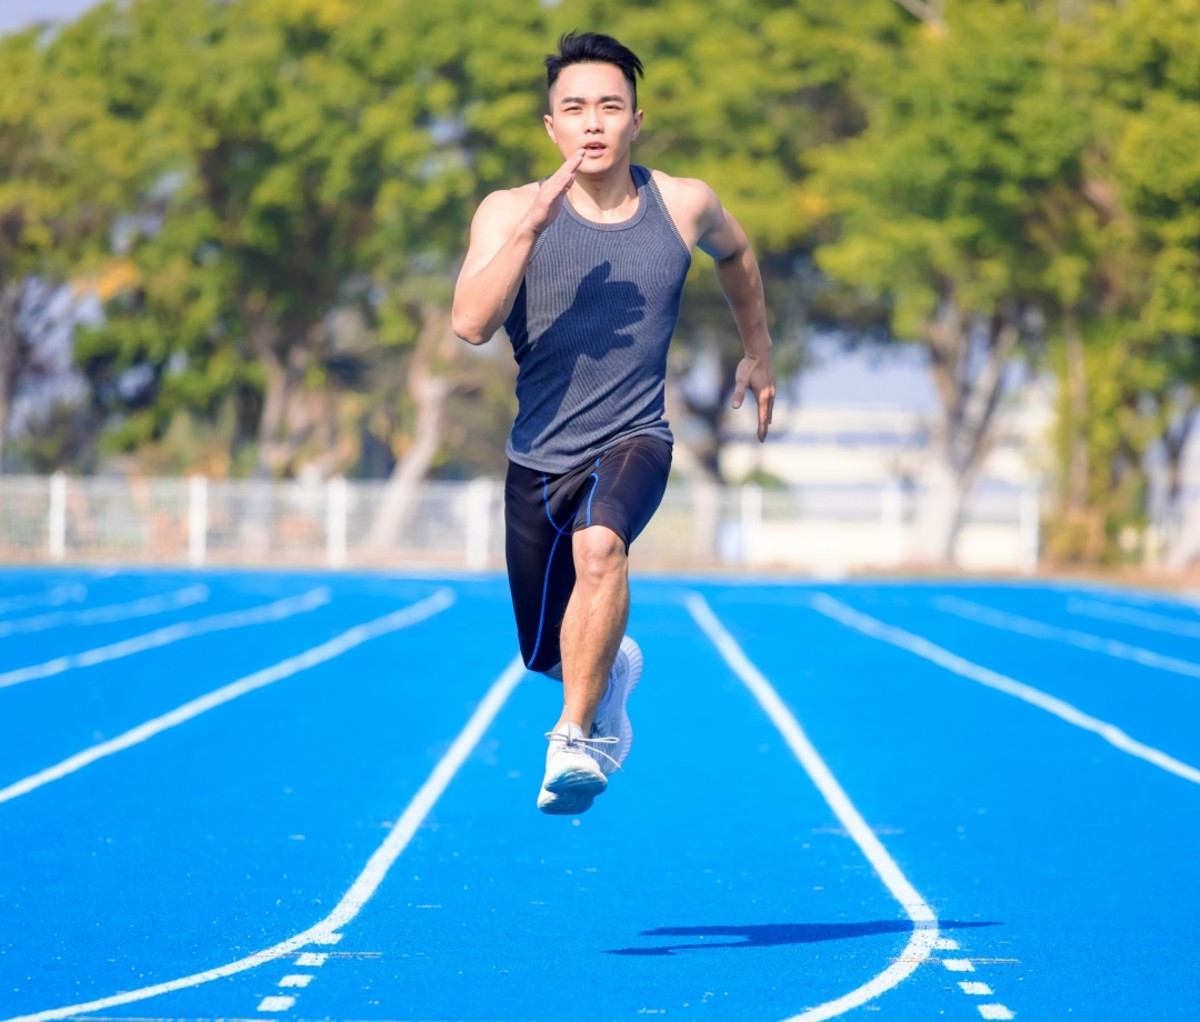 10 Sprint Workouts to Make You Faster - Best Speed Running Plans